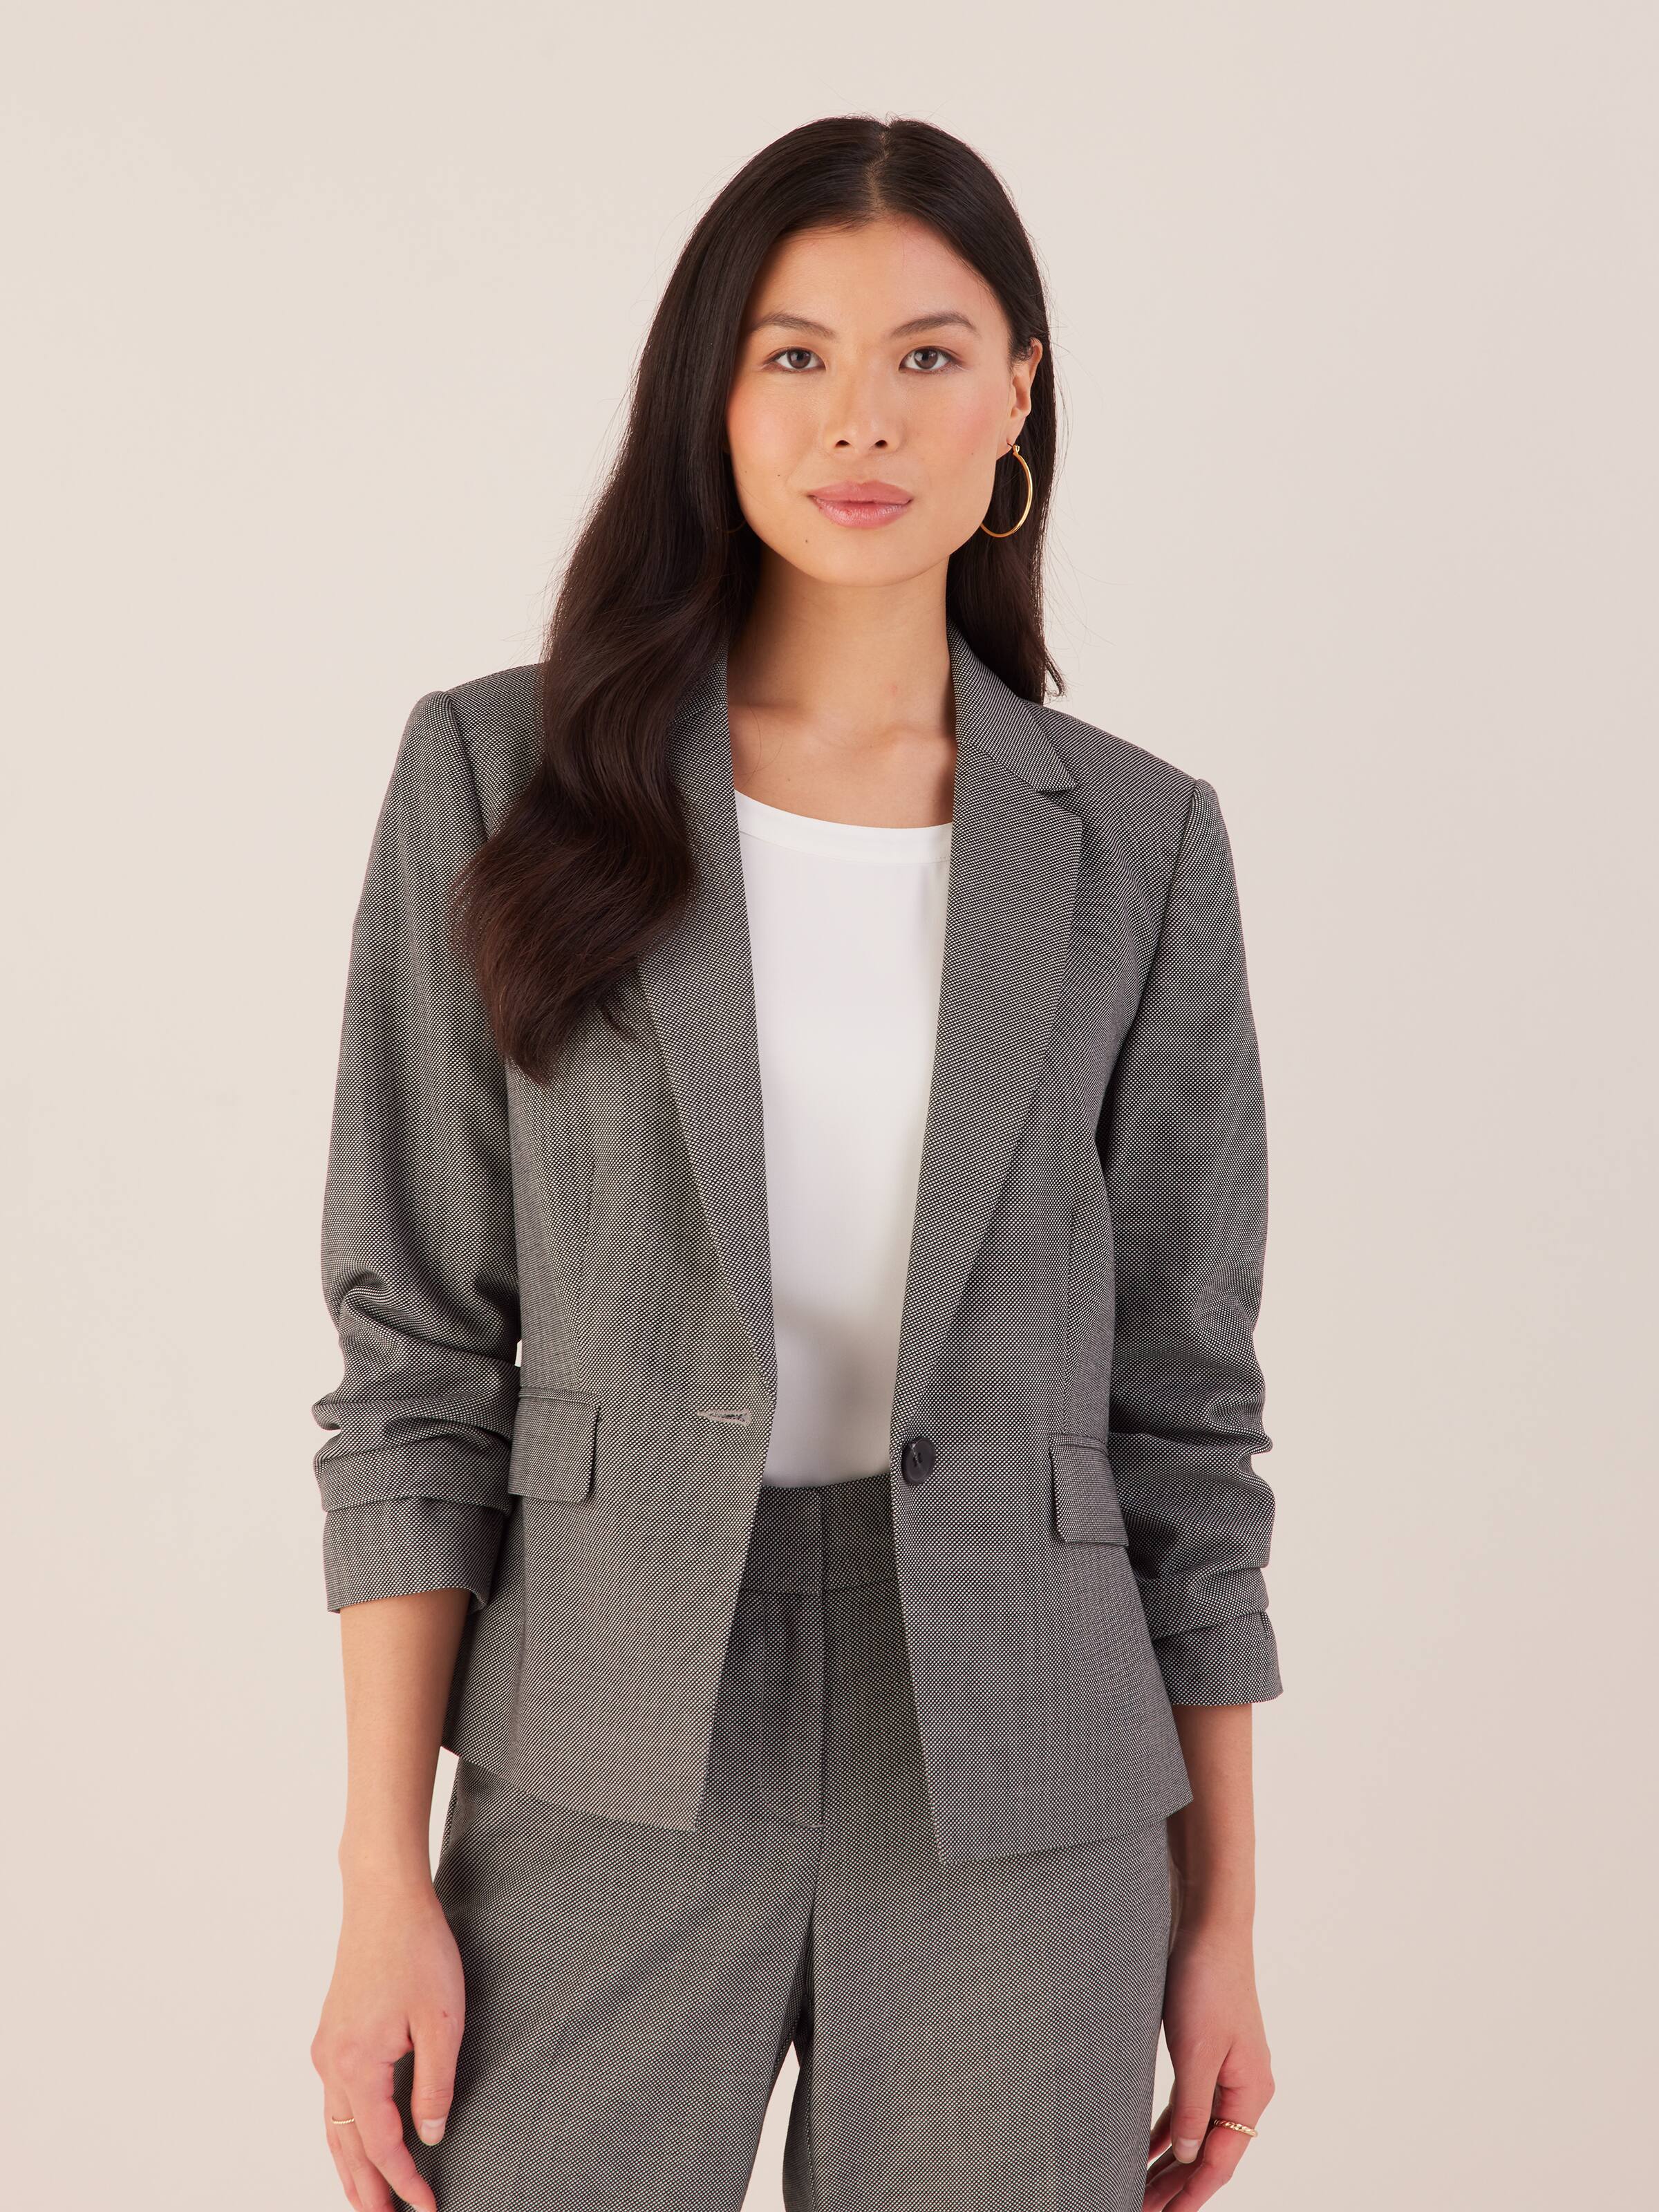 LookbookStore Blazers for Women Suit Jackets Dressy 3/4 Sleeve Blazer  Business Casual Outfits for Work